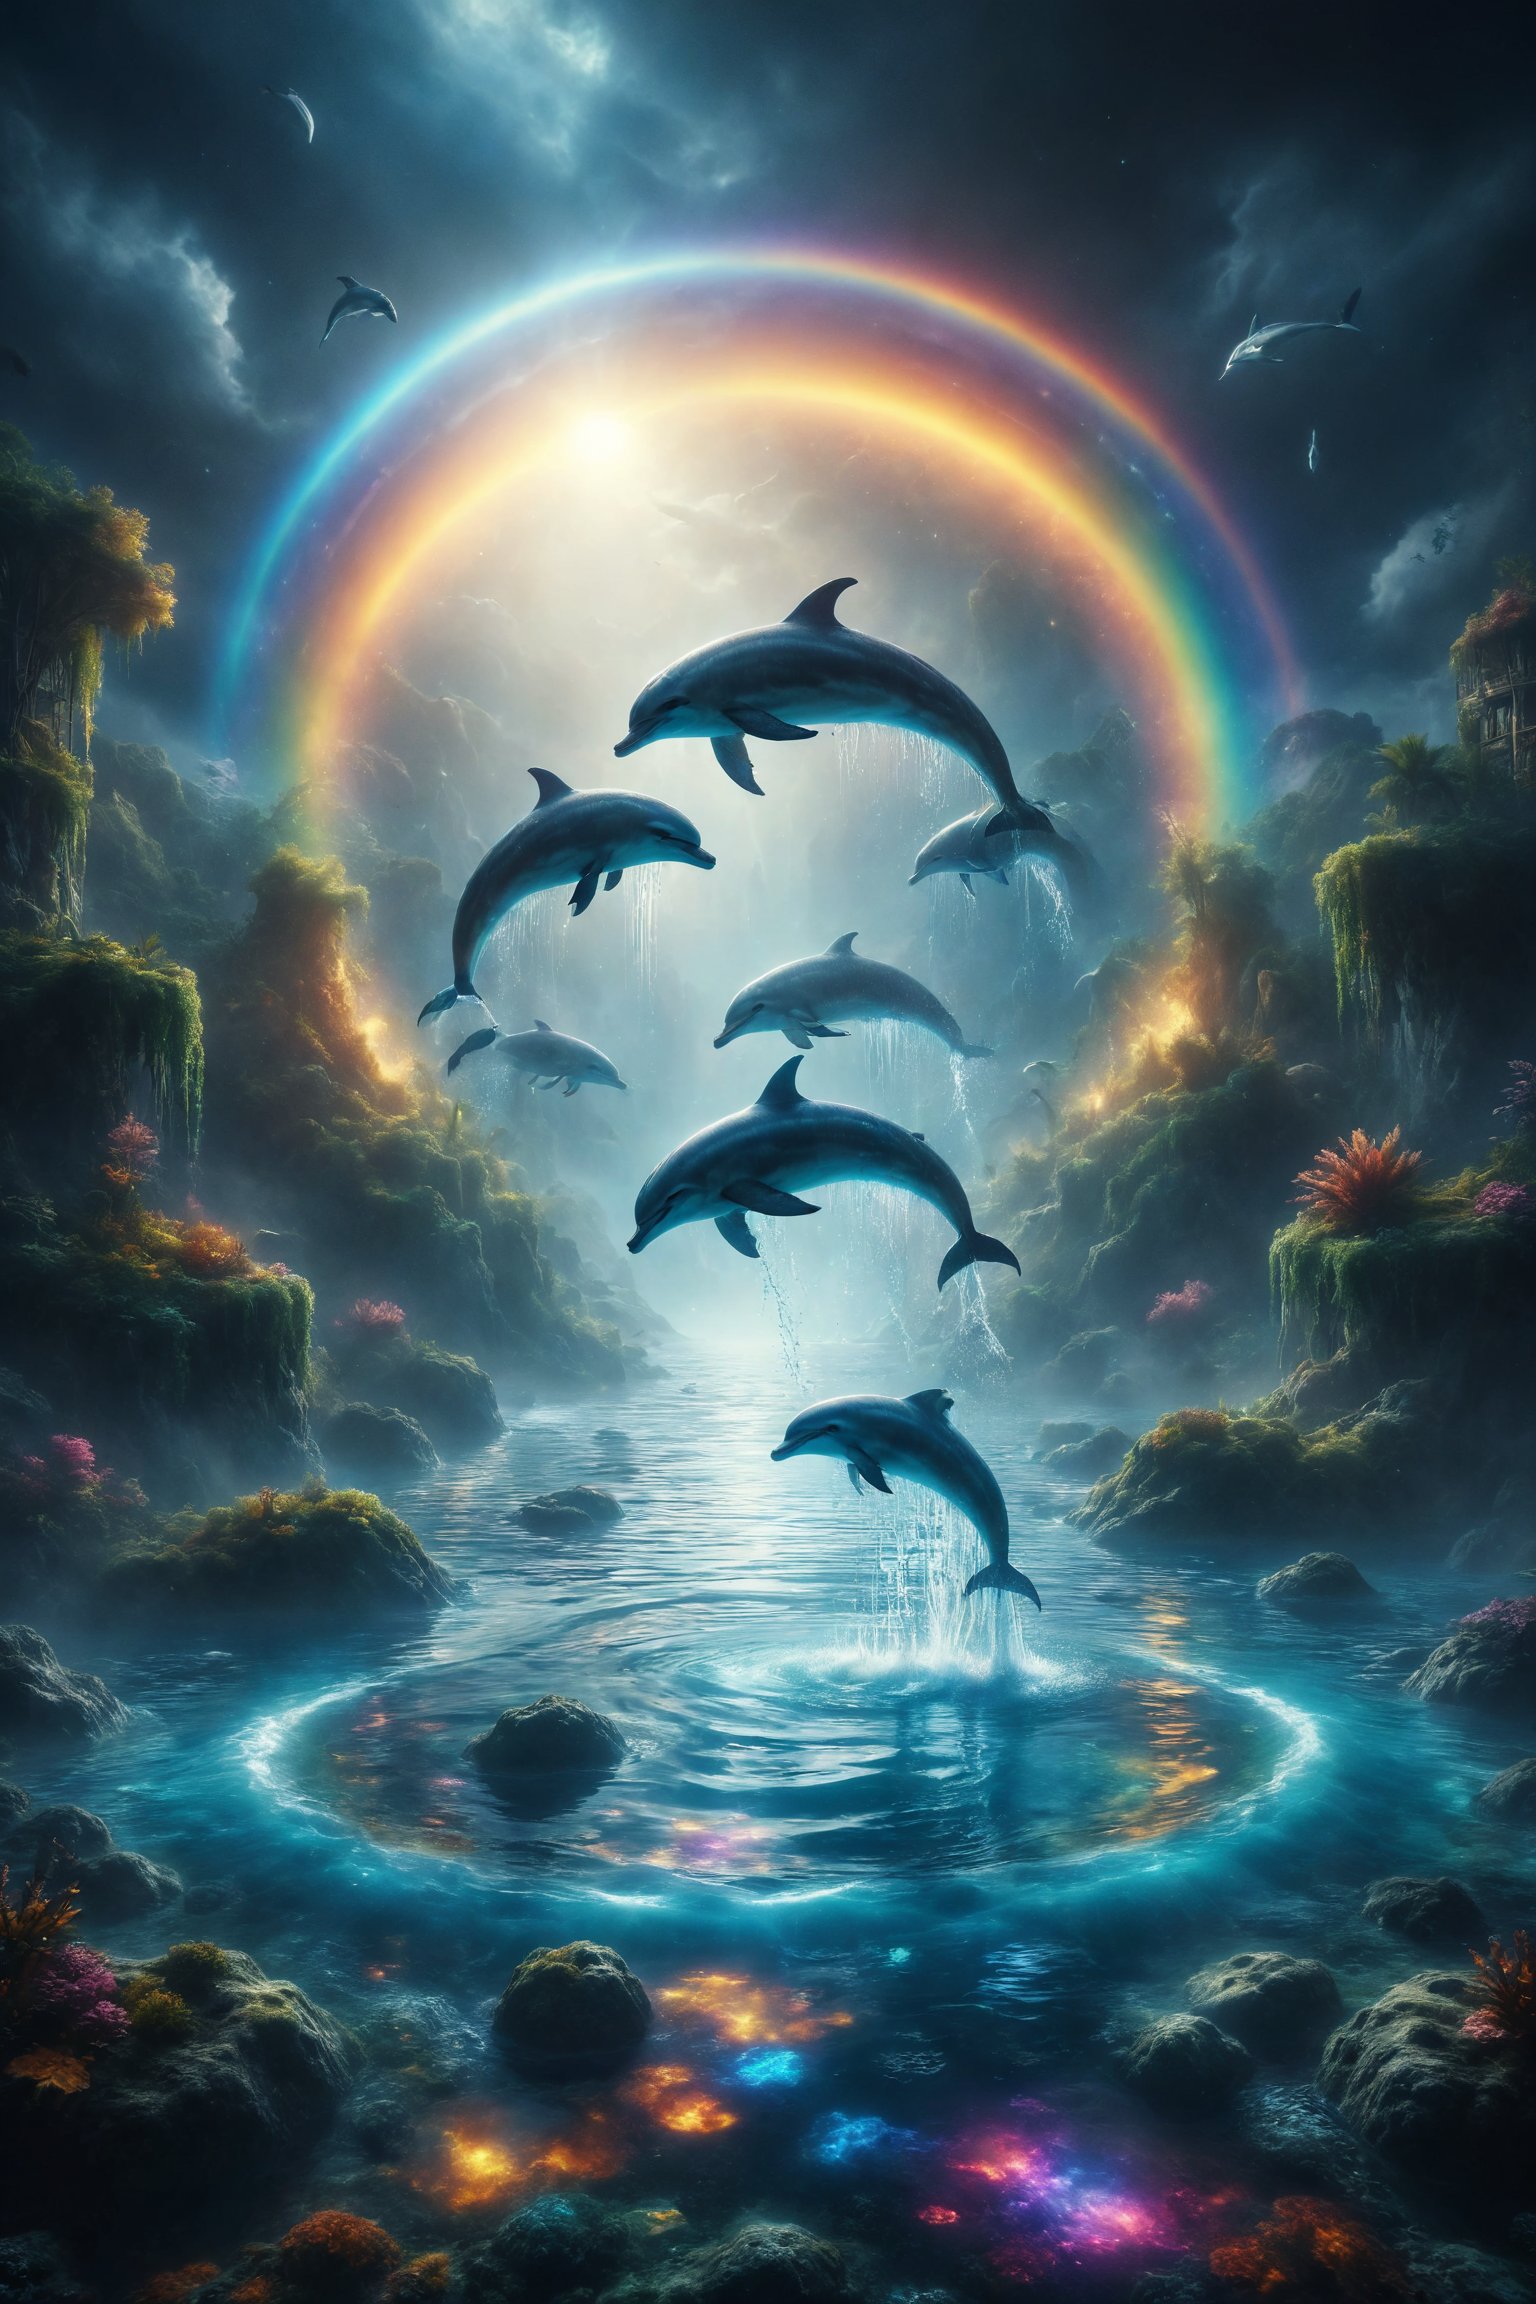  magical lagoon with luminous water and flying dolphins jumping through rainbow hoops.